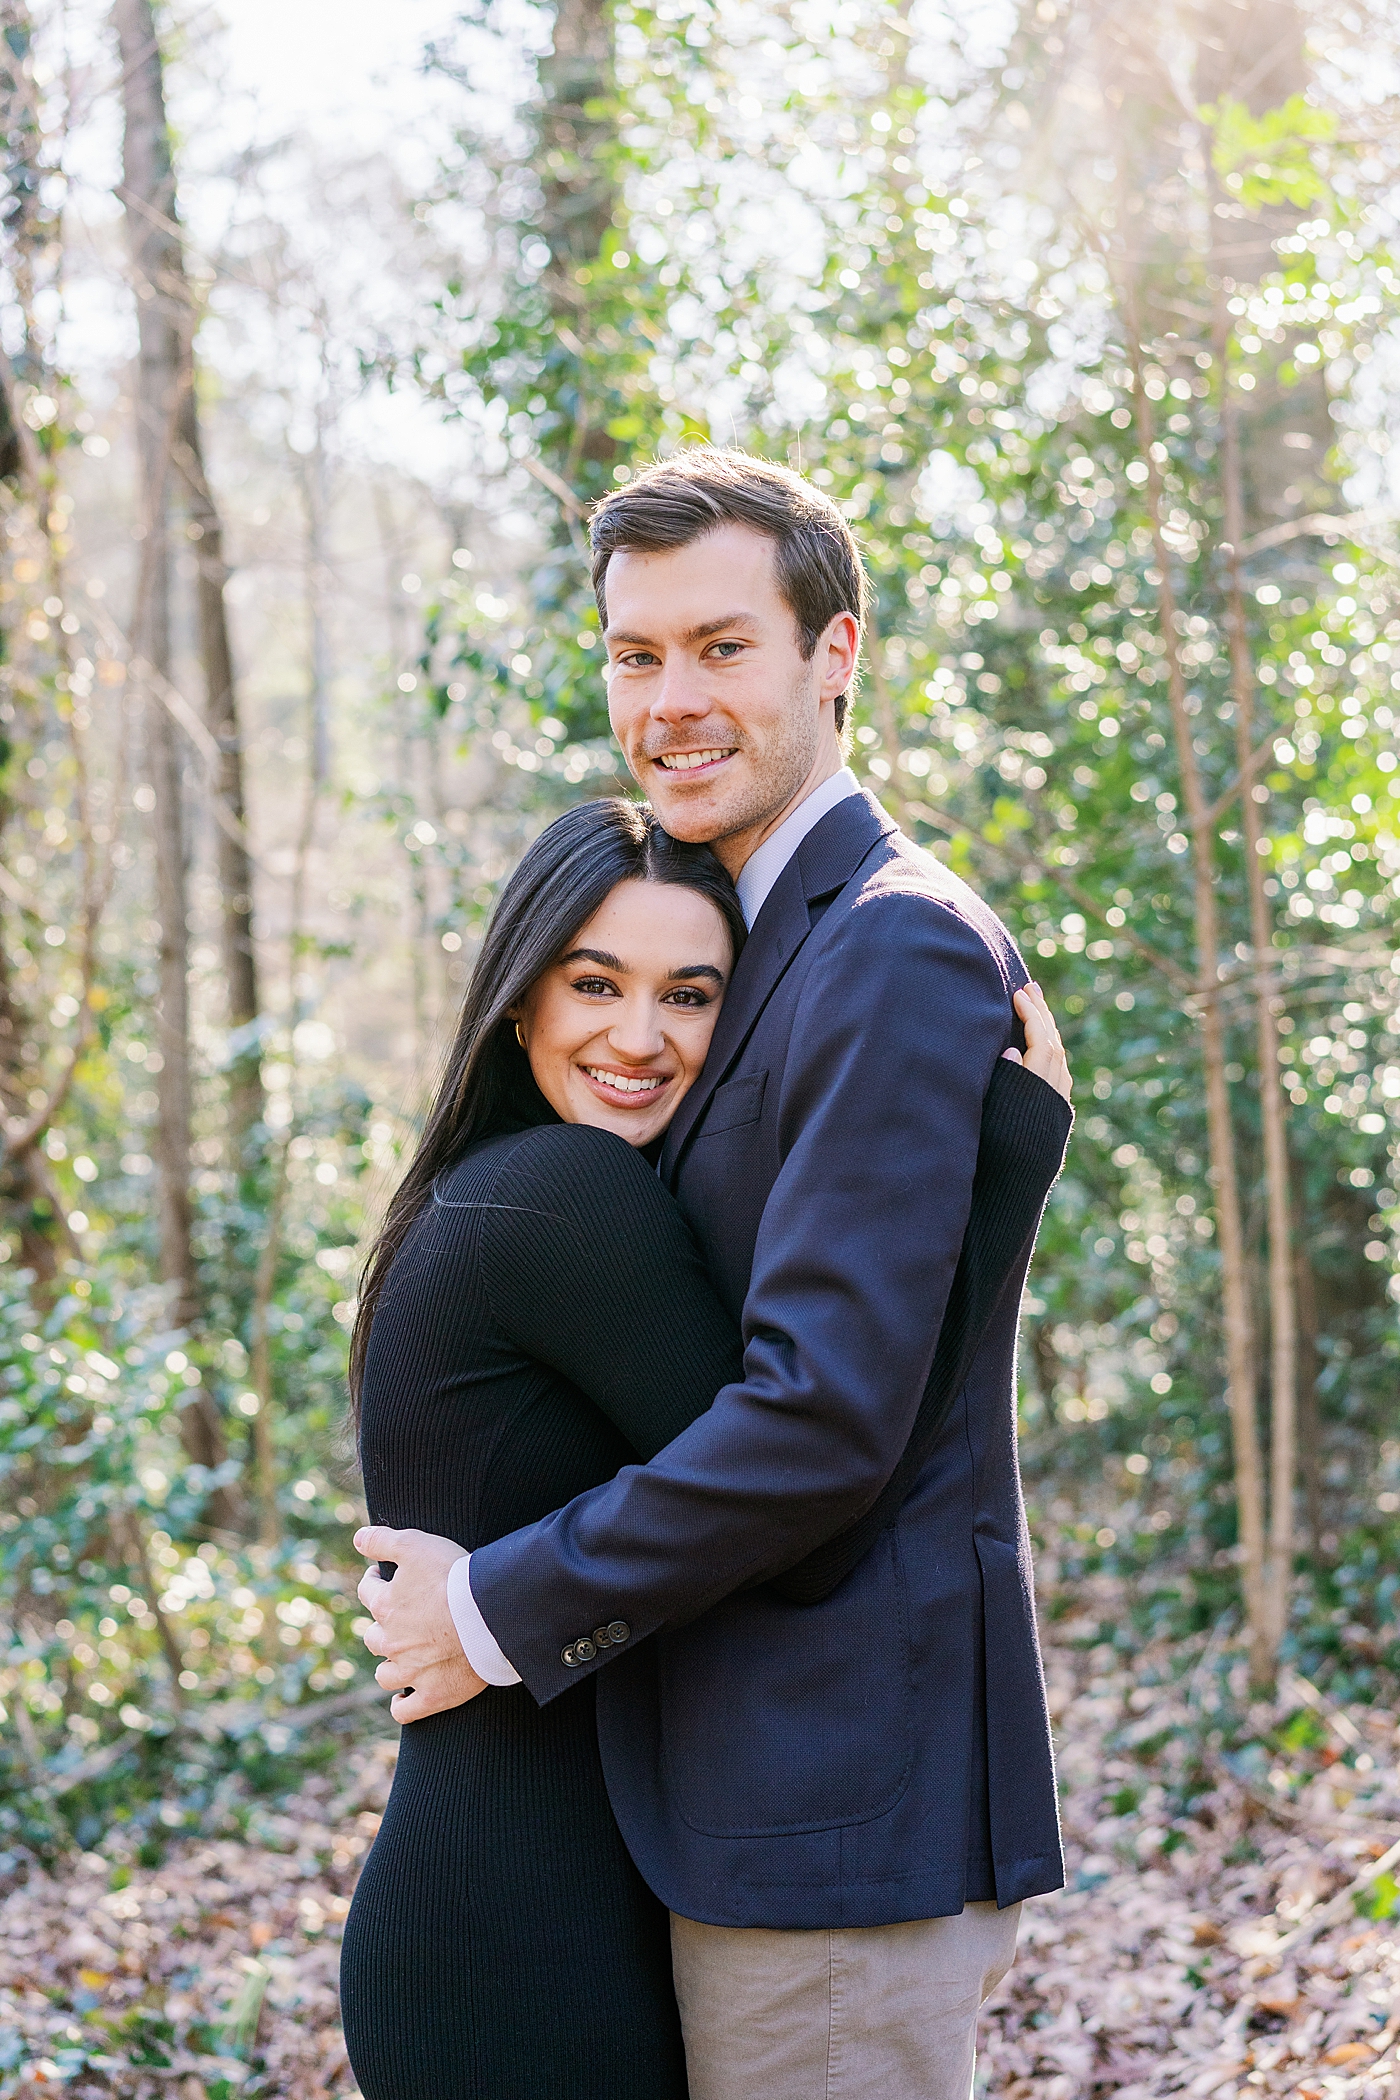 Couple hugging during their engagement session | Image by Annie Laura Photo